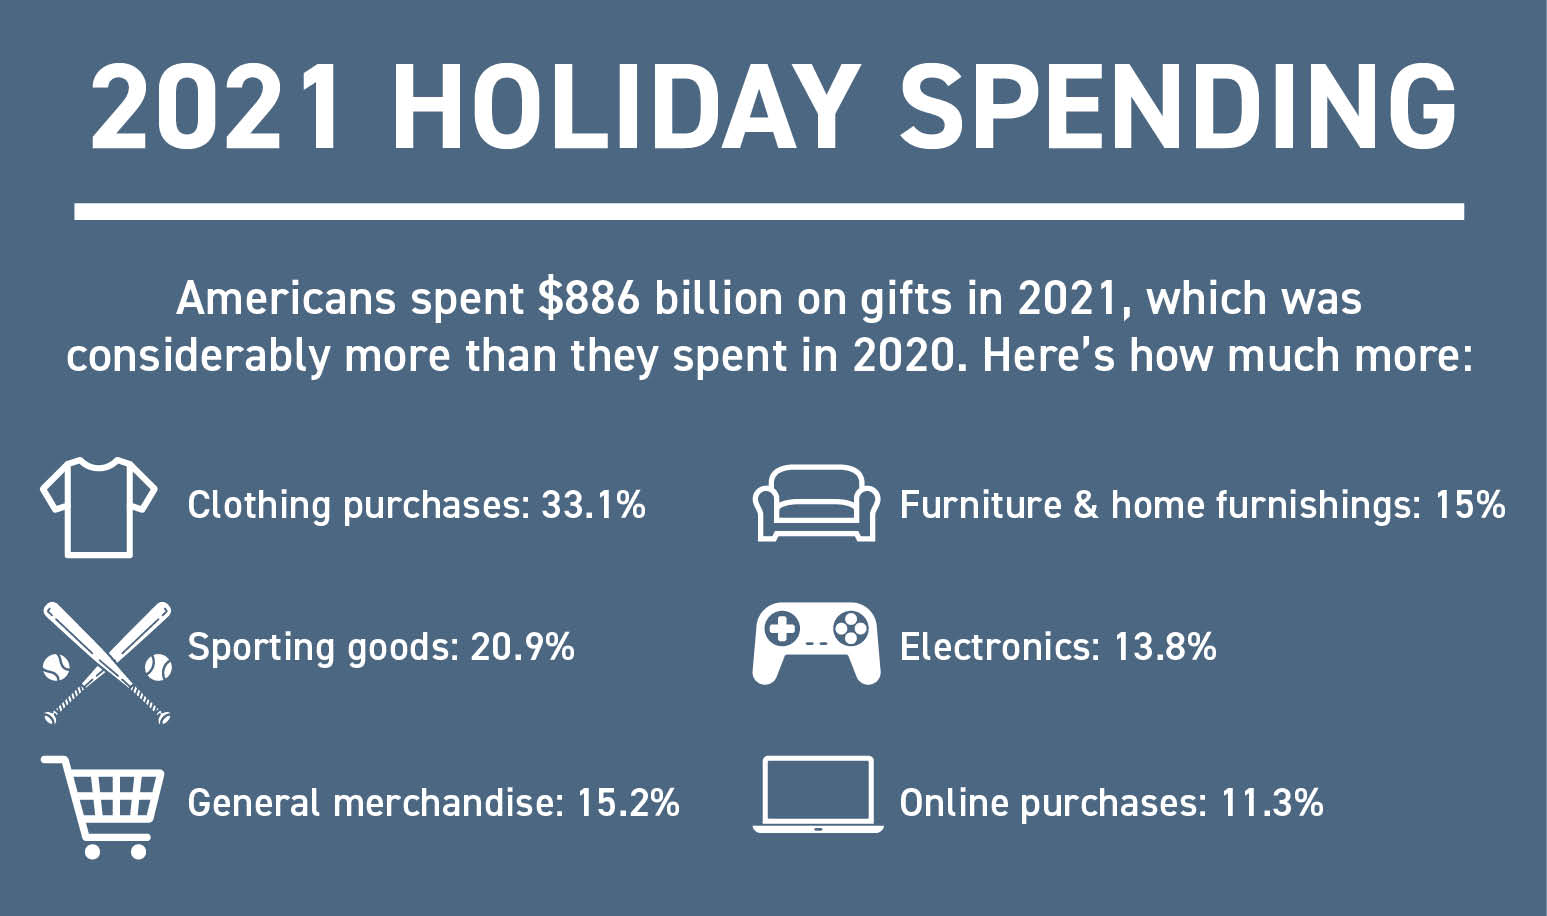 2021 Holiday Spending